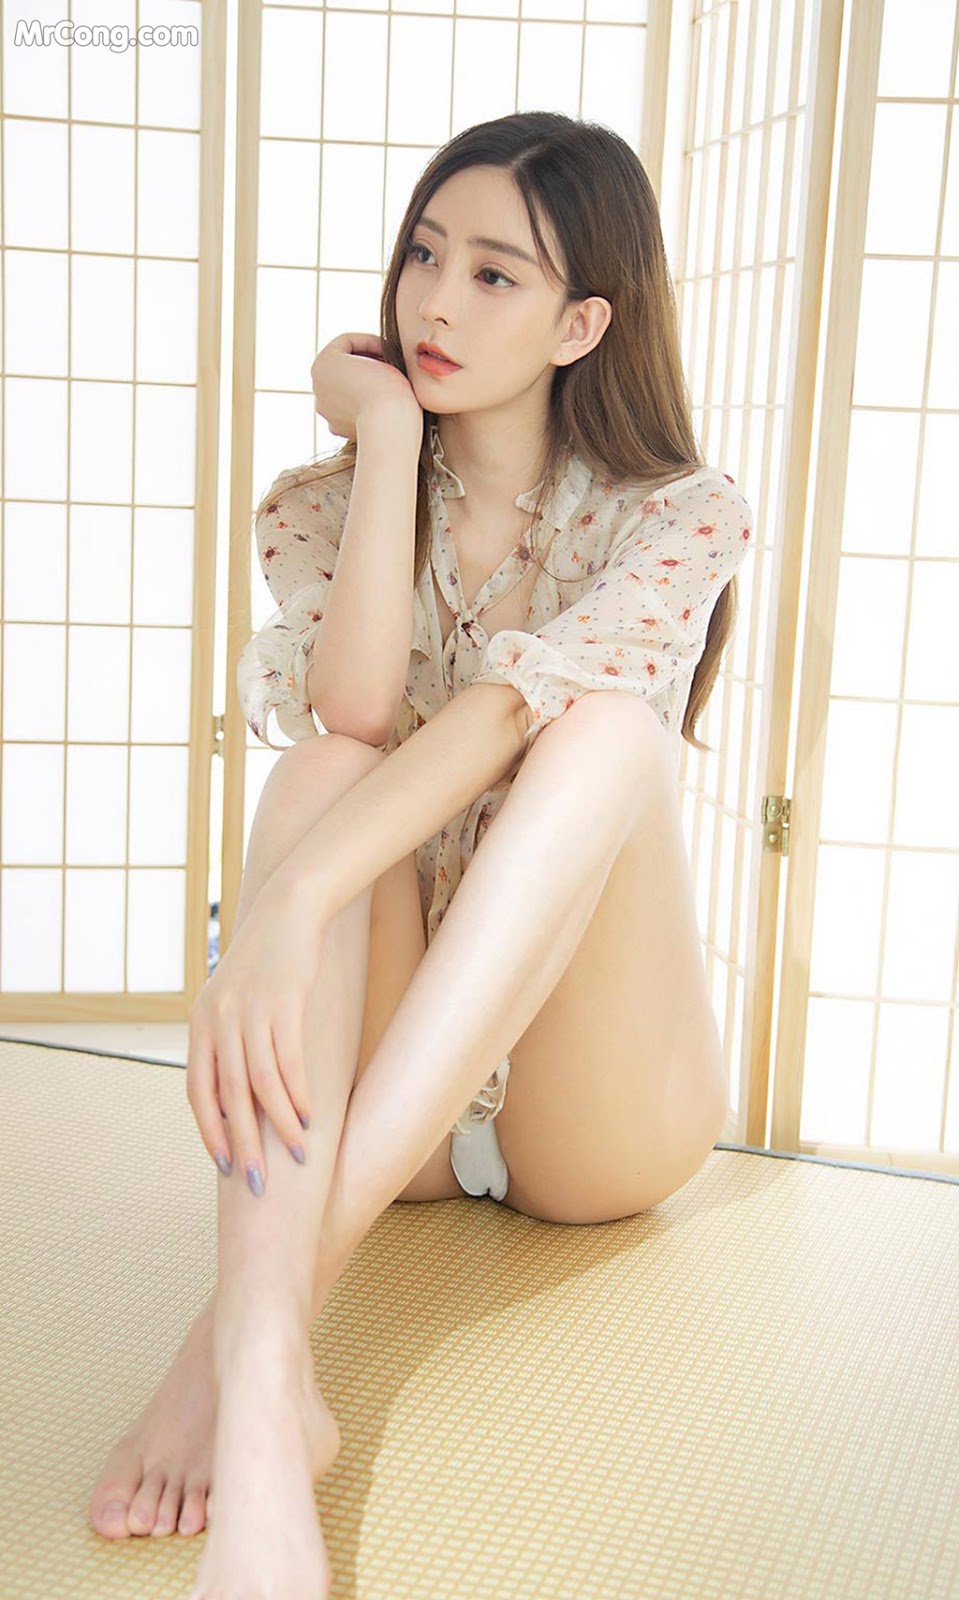 UGIRLS - Ai You Wu App No. 1561: 小 熙 (35 pictures) photo 1-10